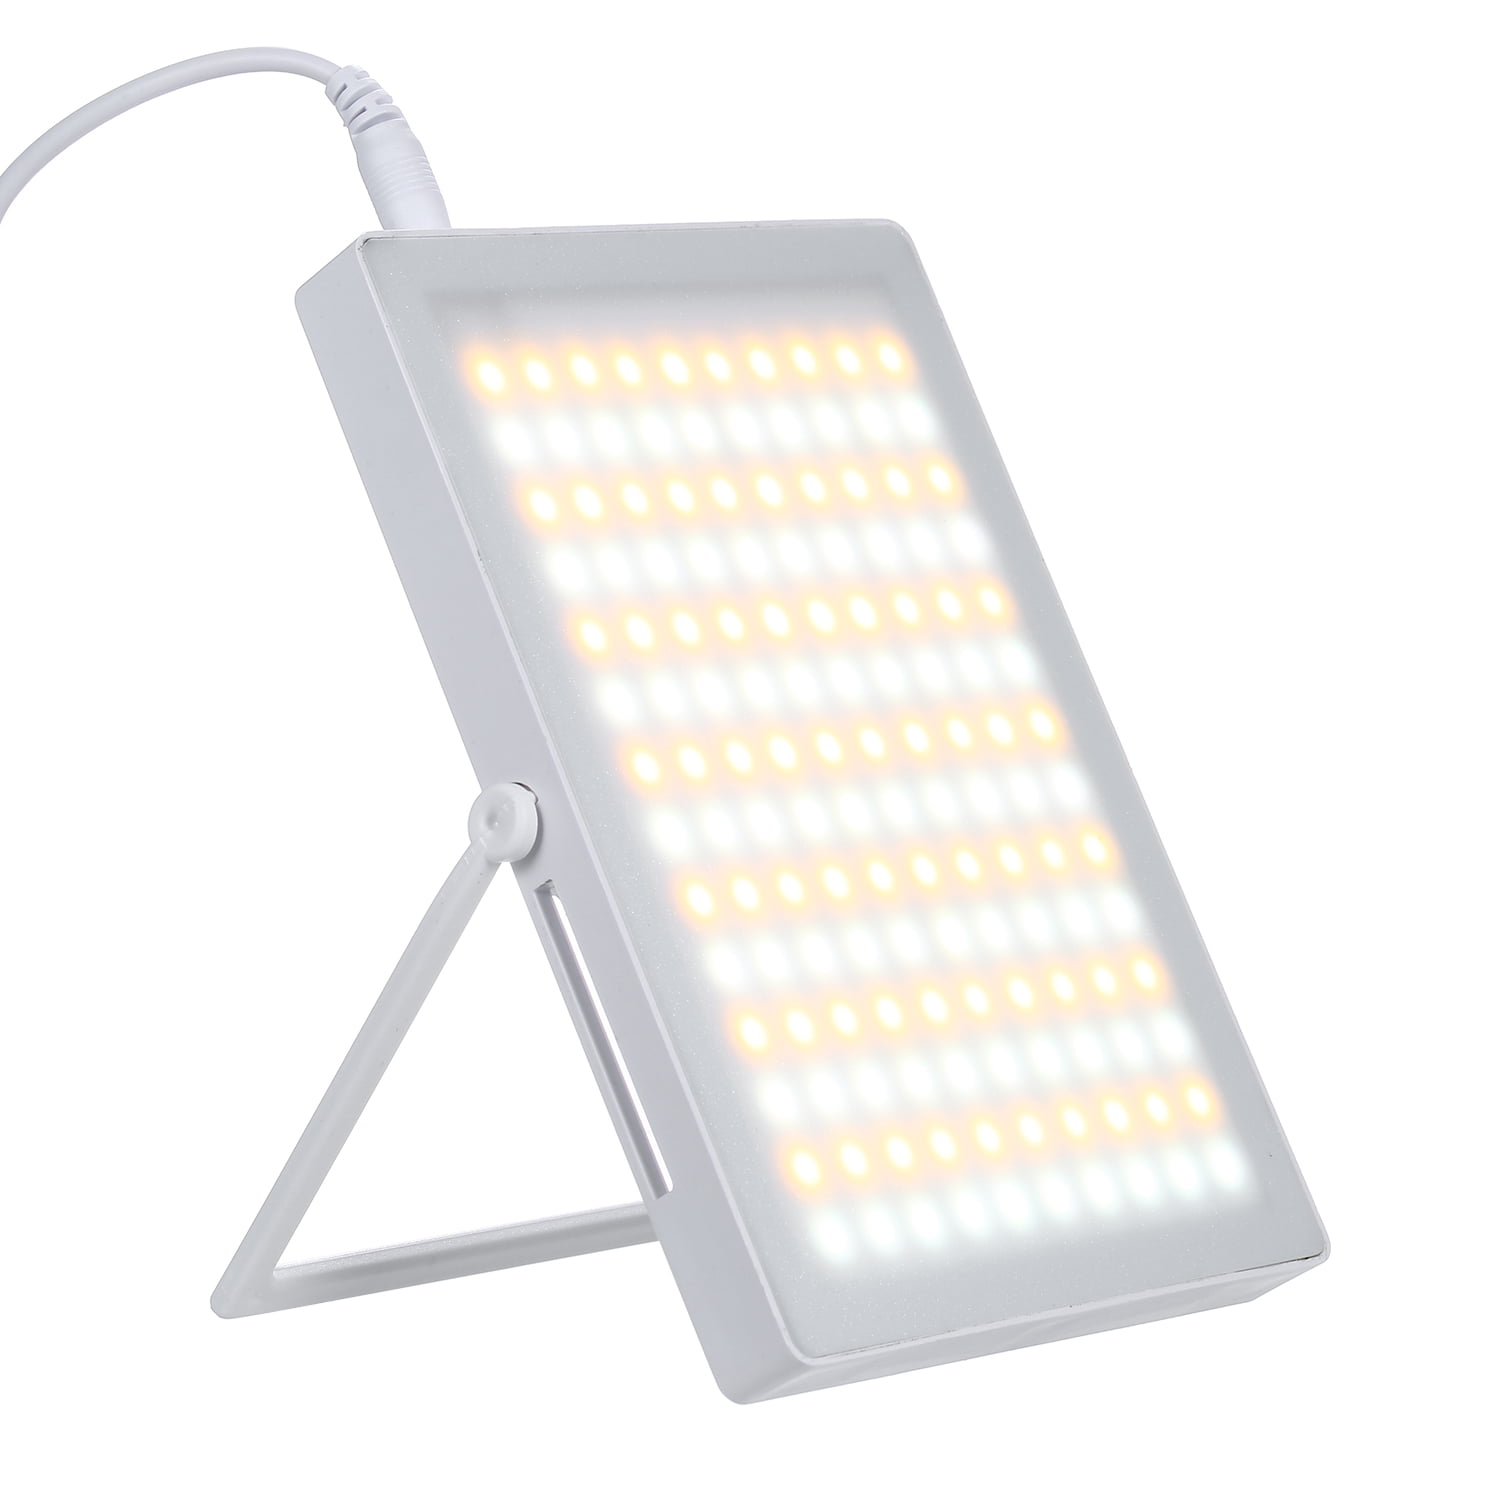 Carevas Therapy Lamp Depression Affective Disorder Phototherapy